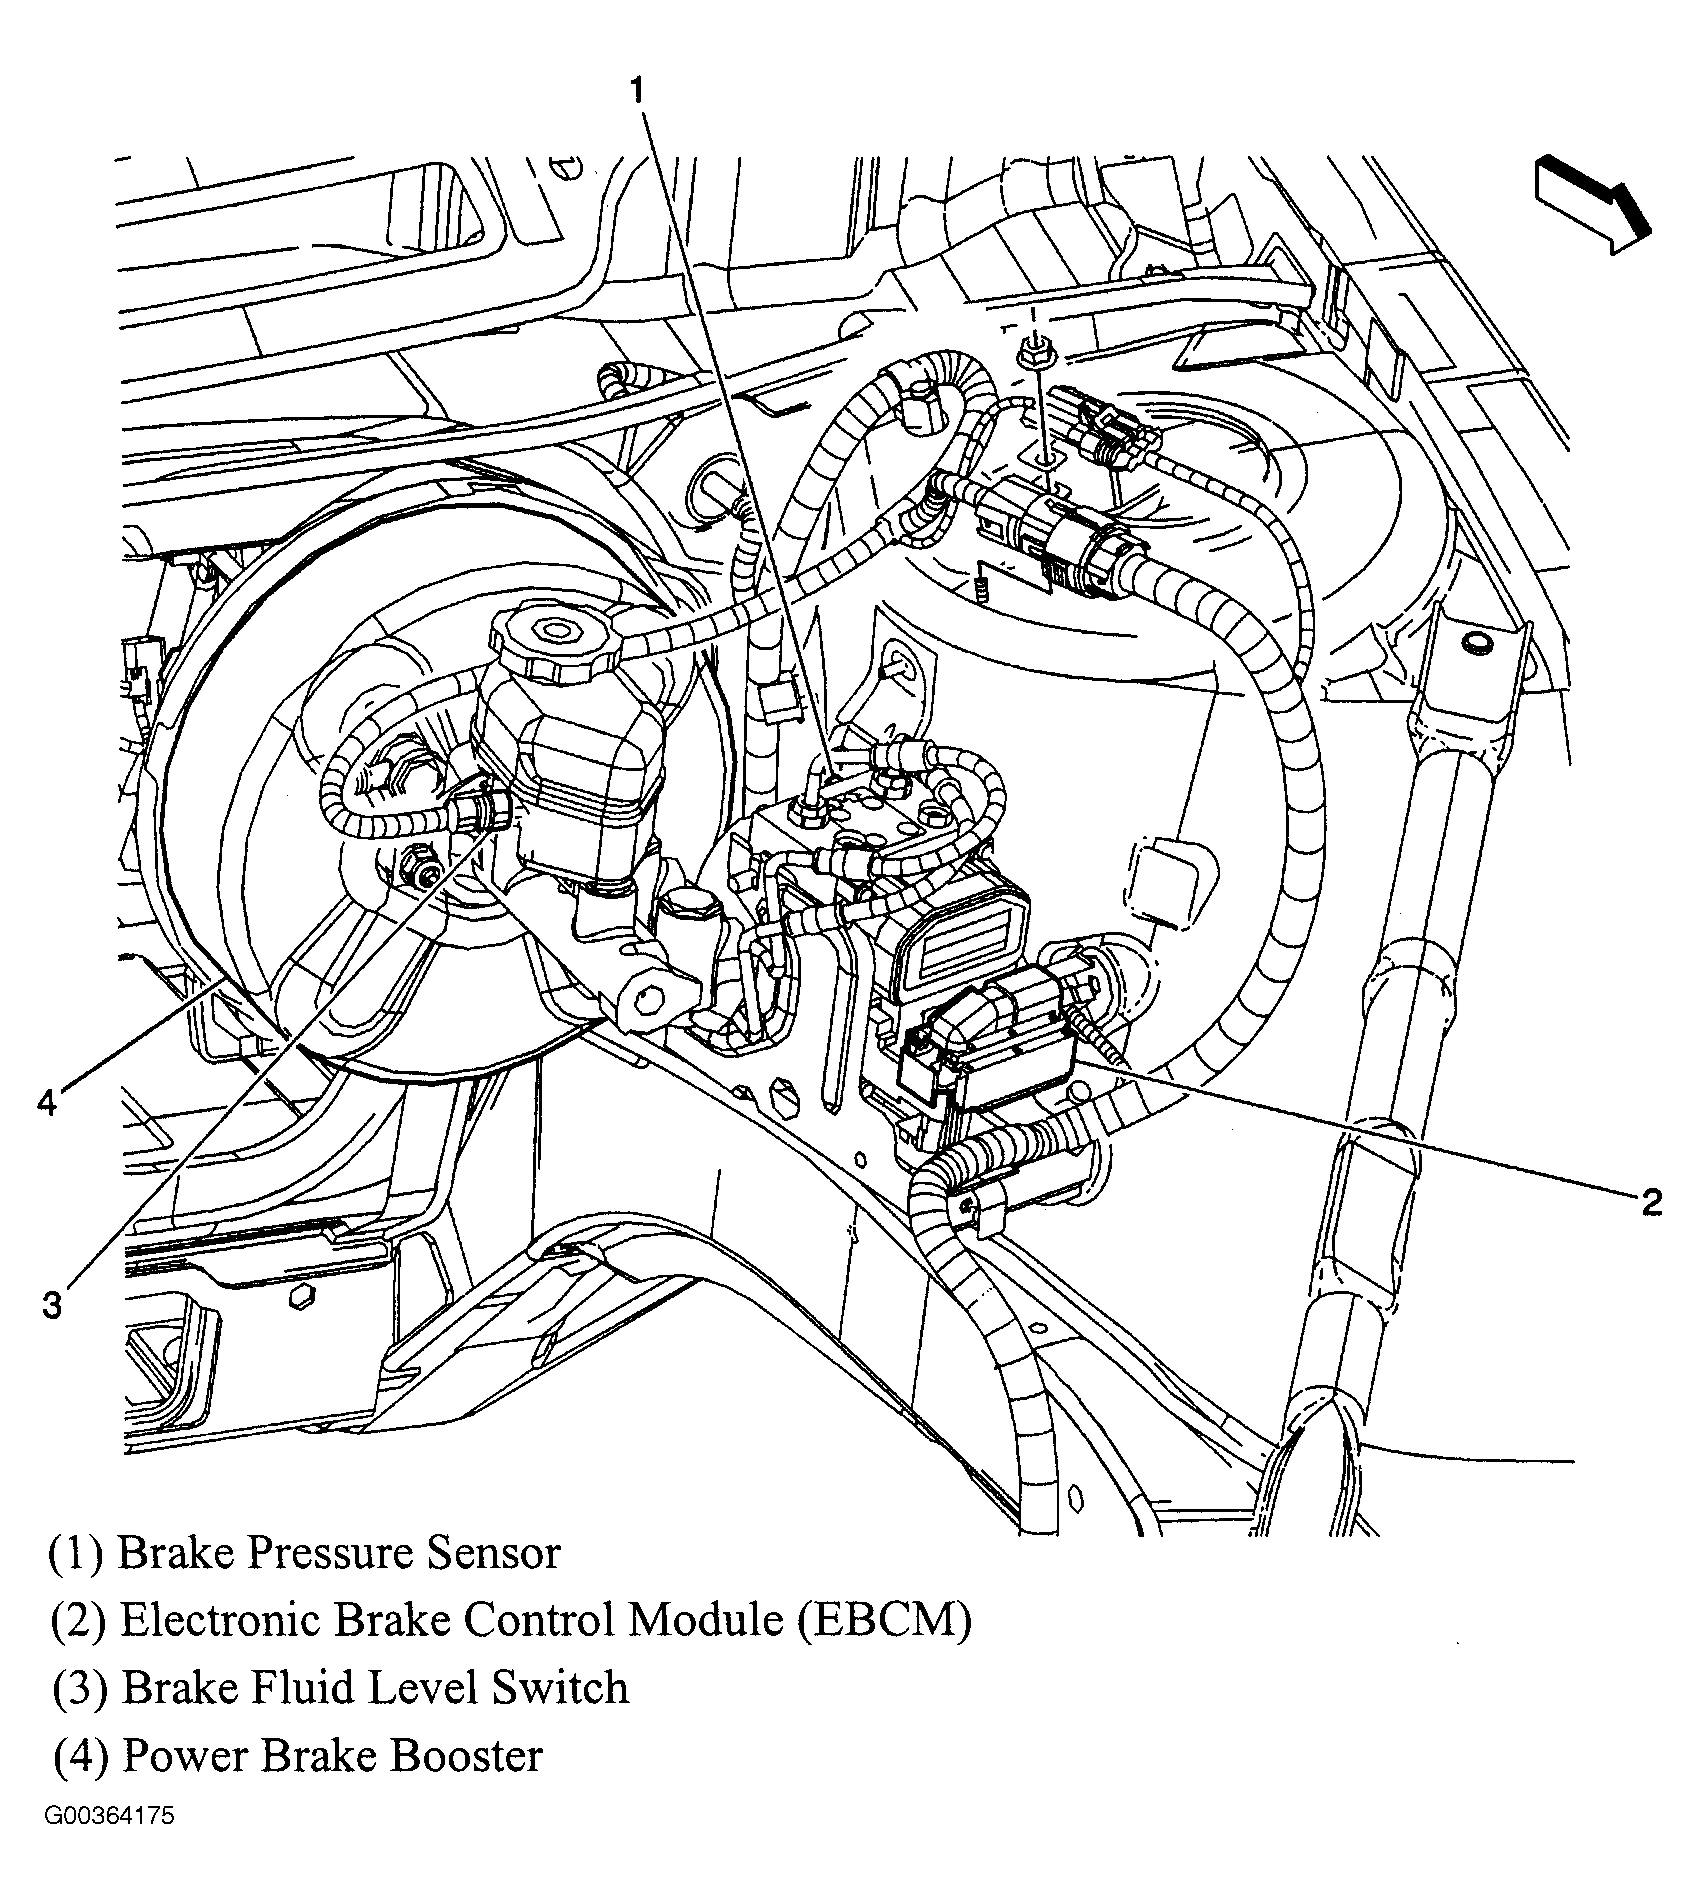 Buick LaCrosse CX 2006 - Component Locations -  Left Rear Of Engine Compartment